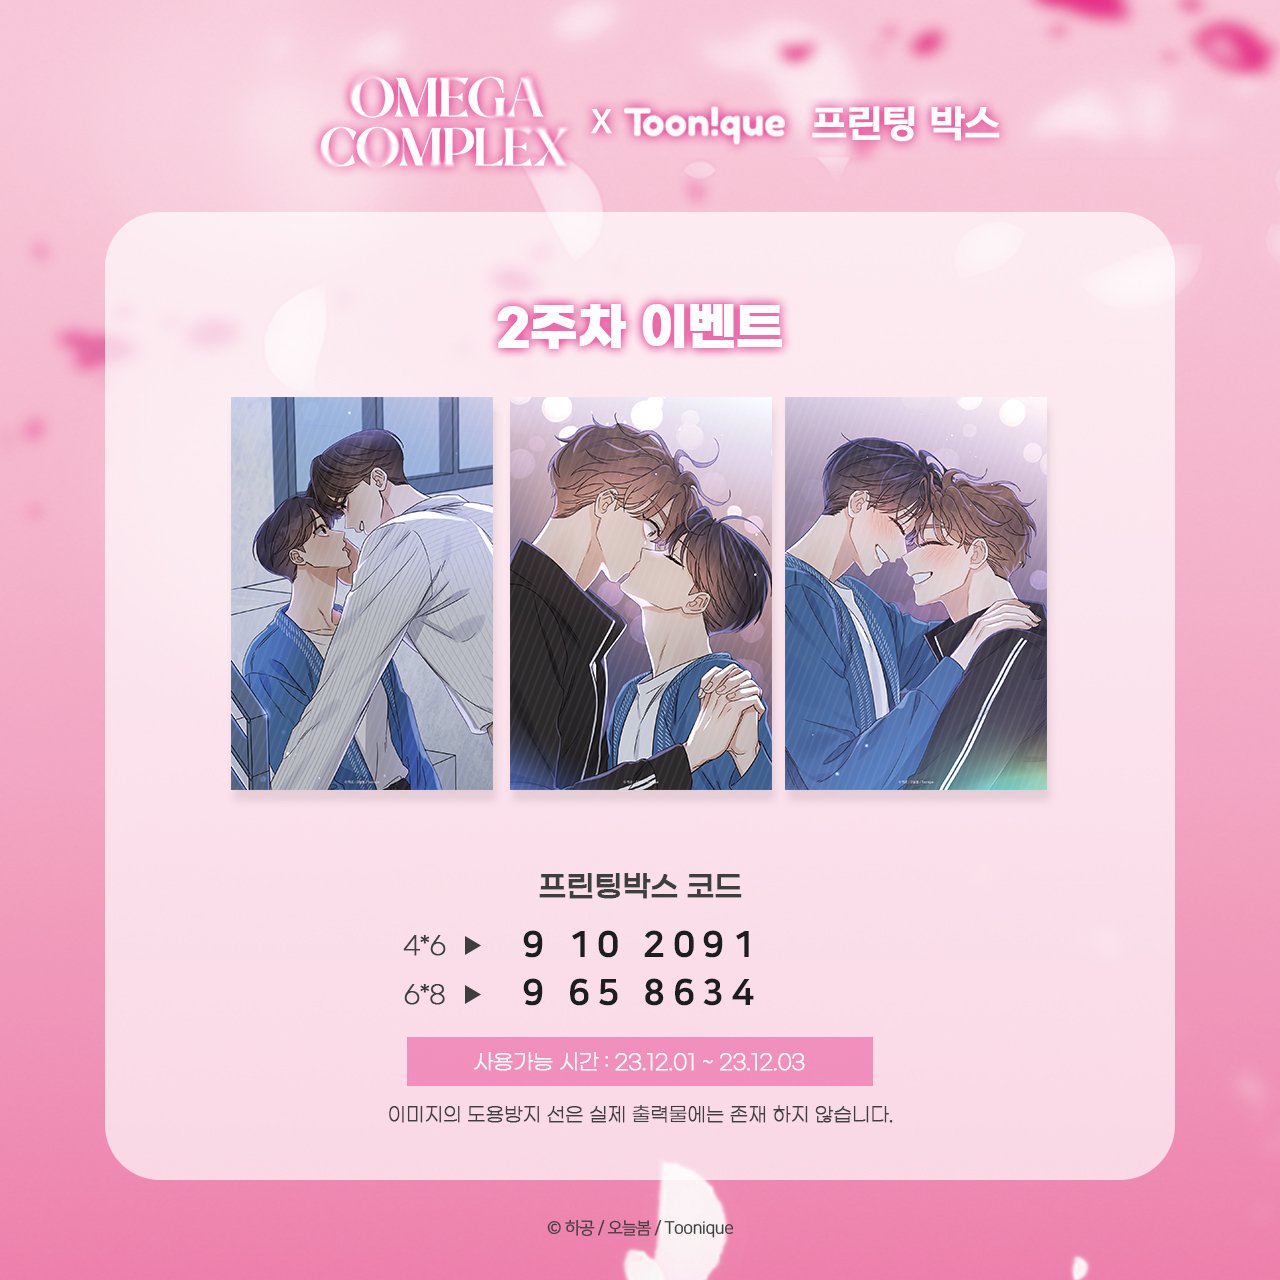 [collaboration cafe] Omega Complex : Printing Photo Ver.2